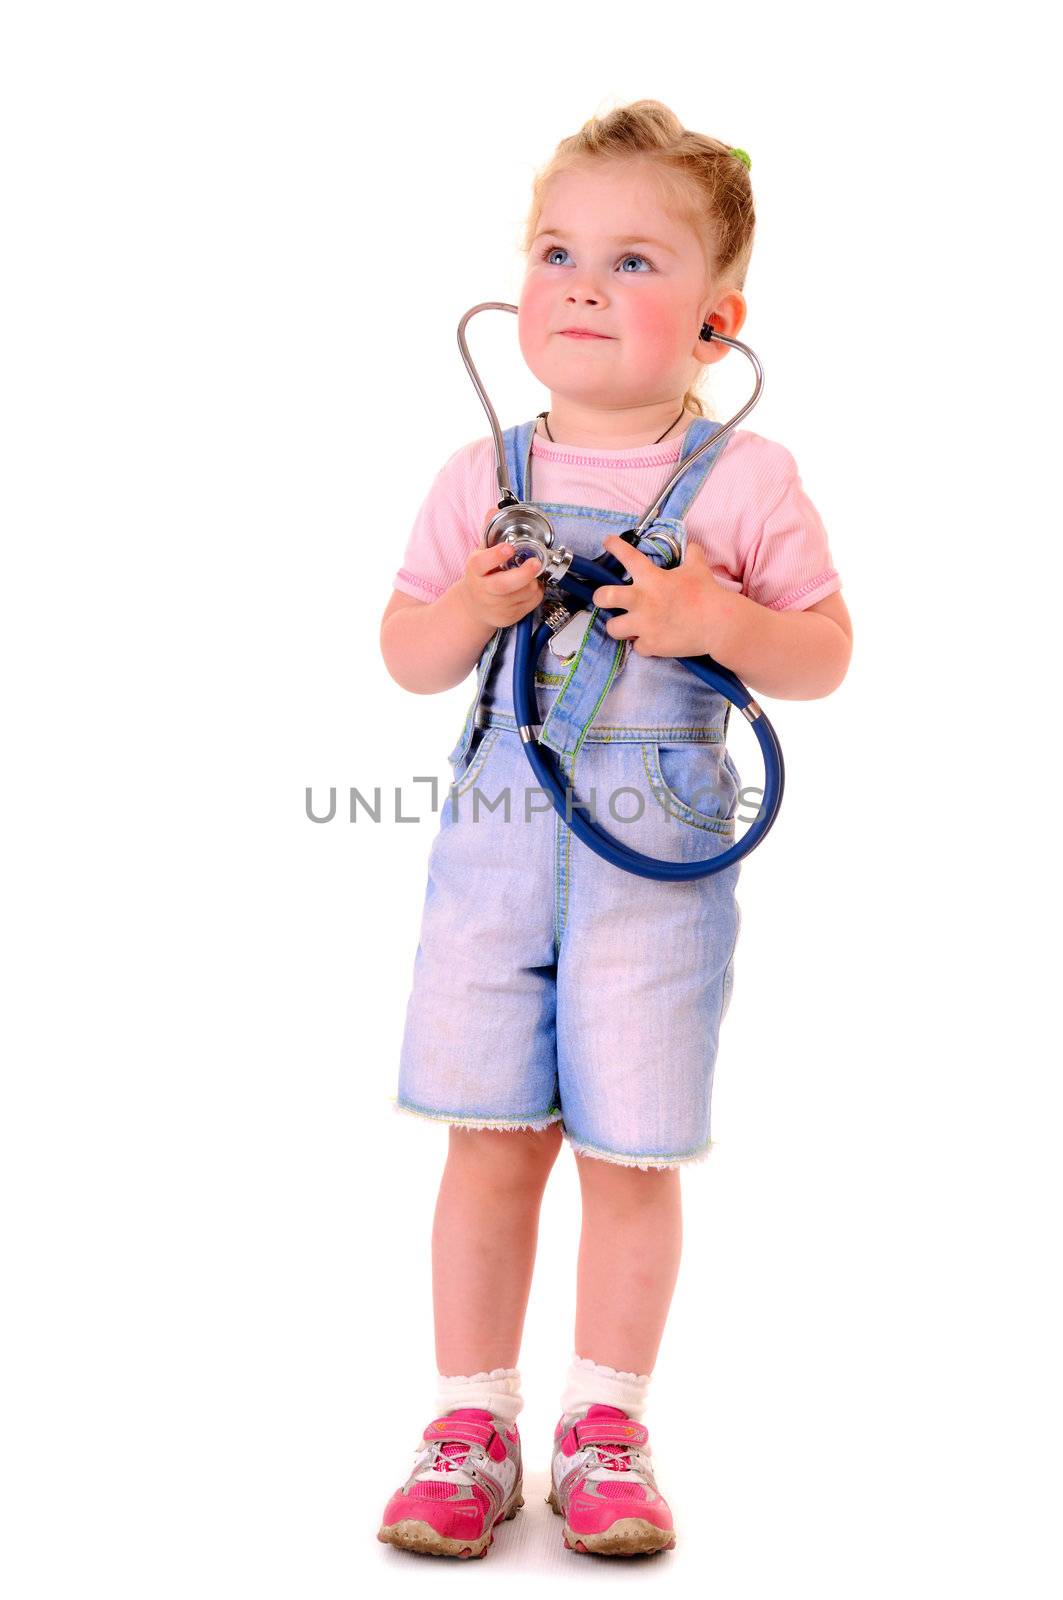 Small playful girl with stethoscope on white background